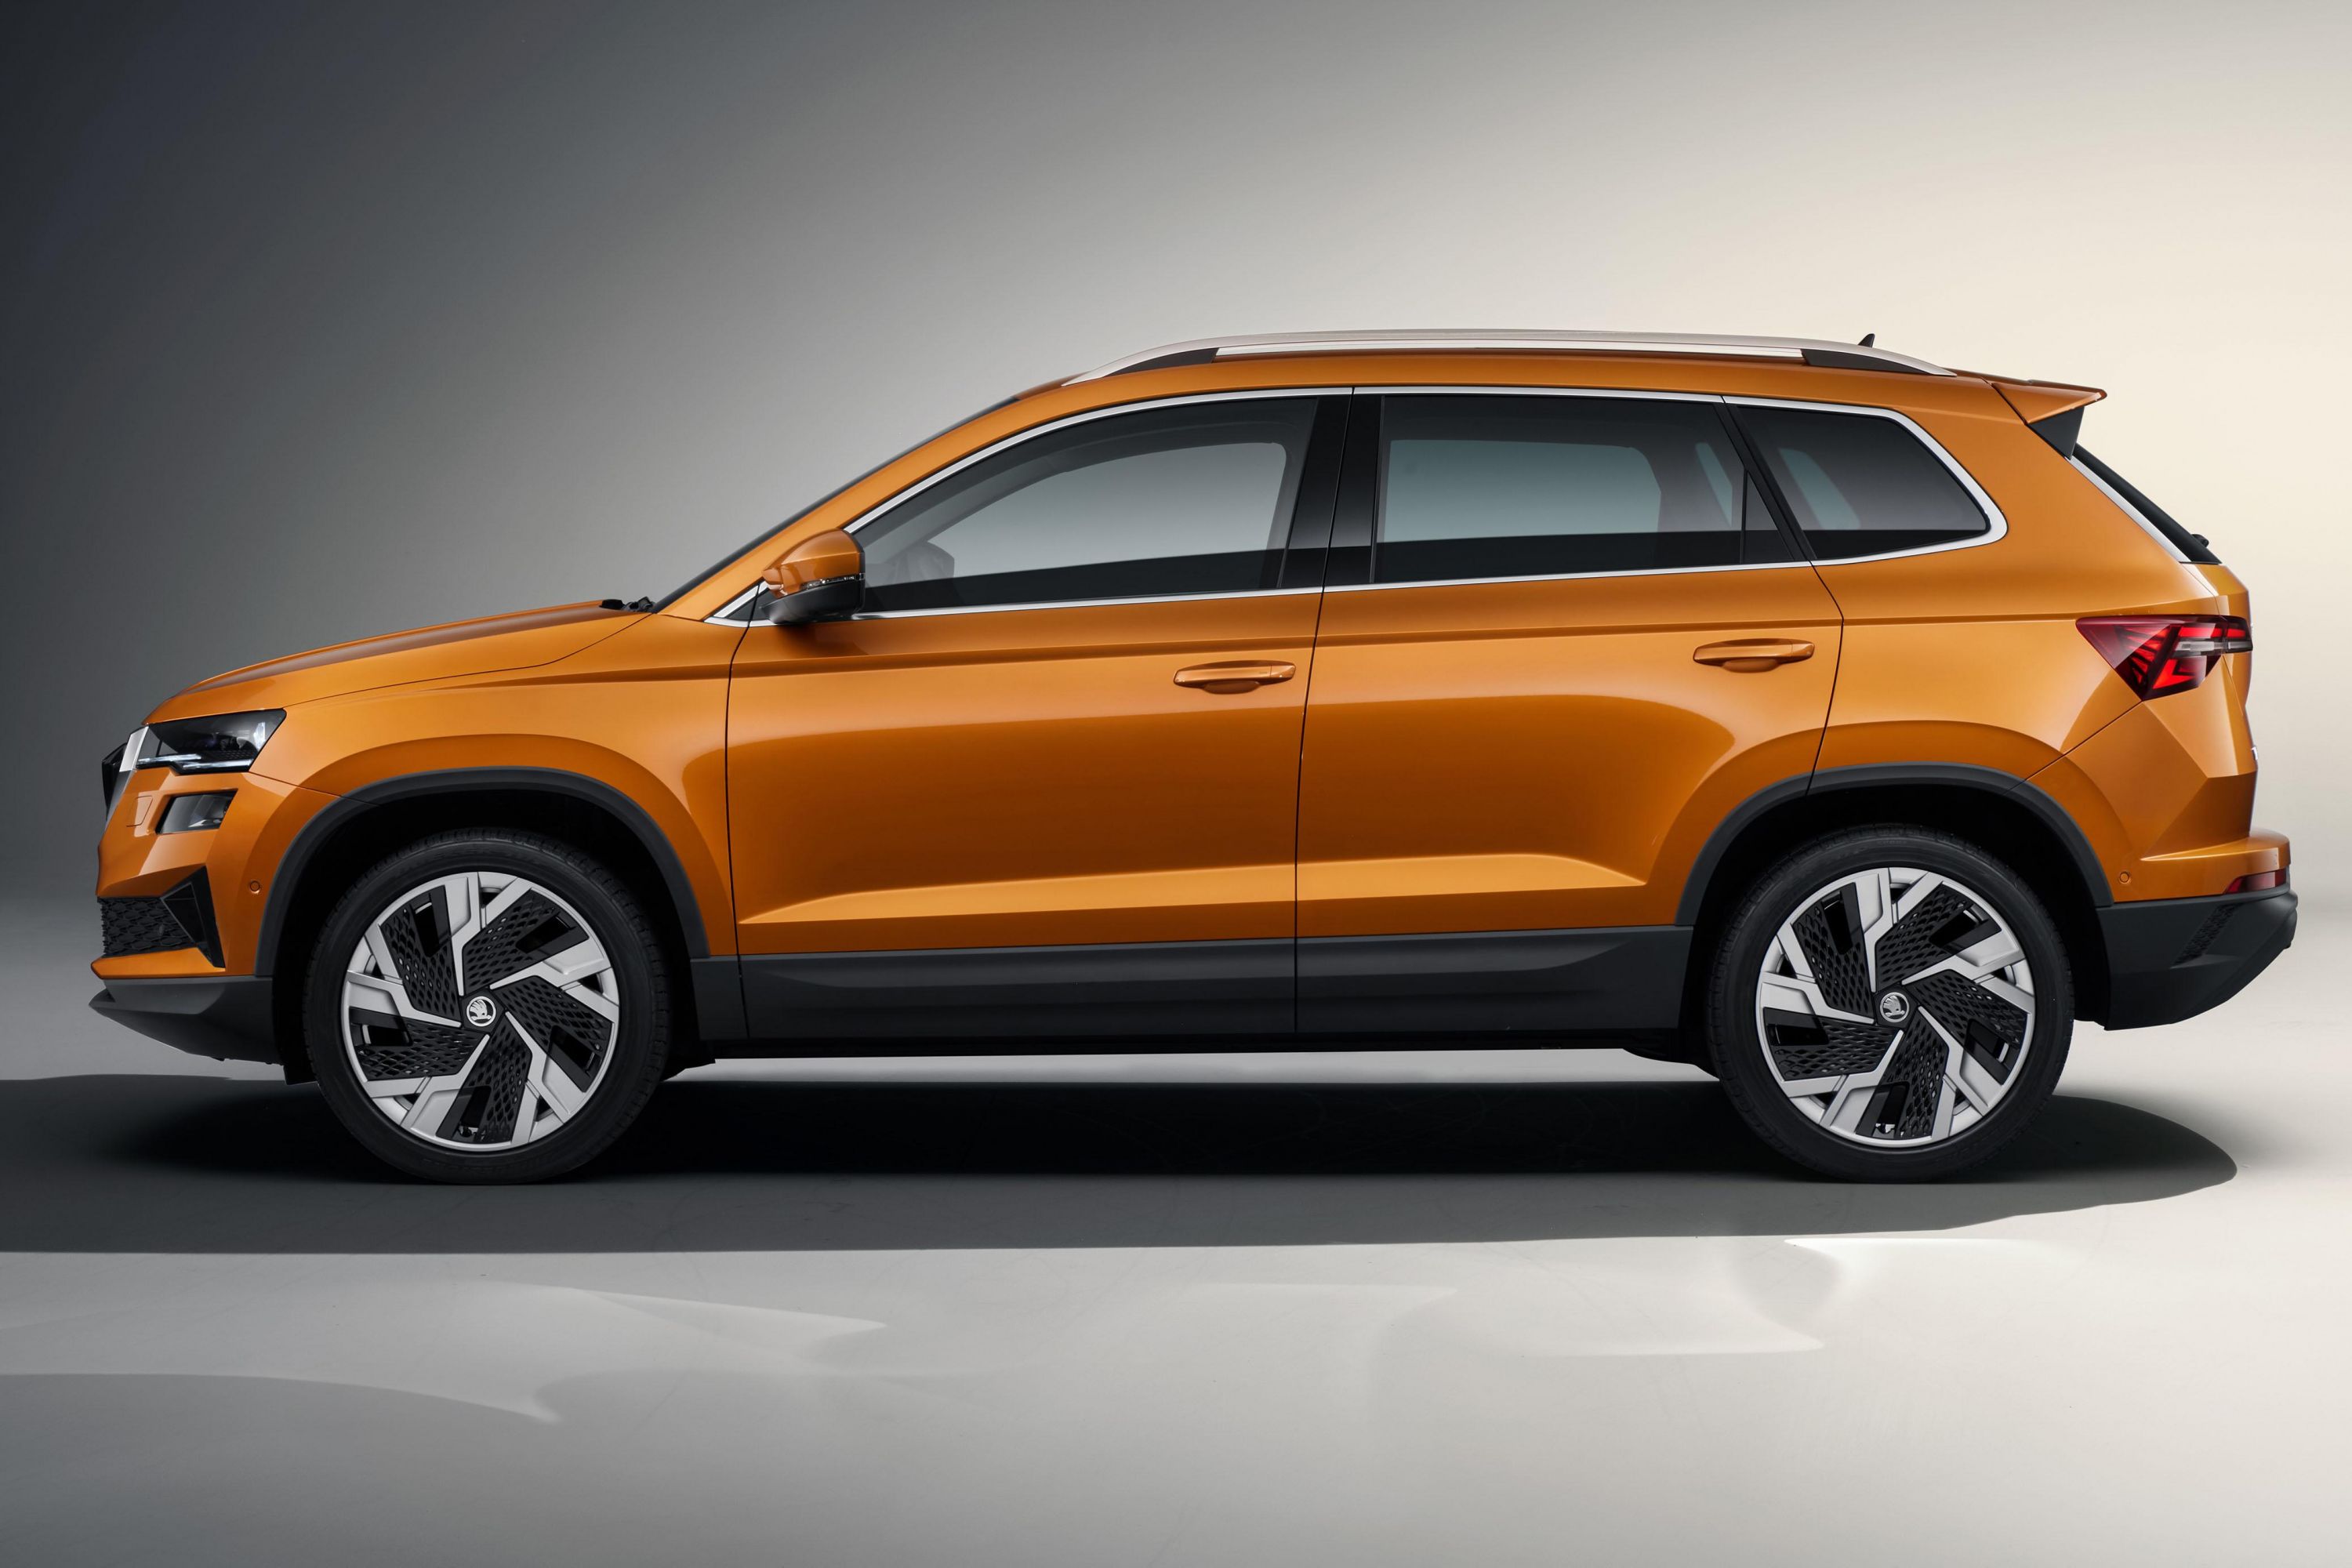 2022 Skoda Karoq: pricing and specification revealed